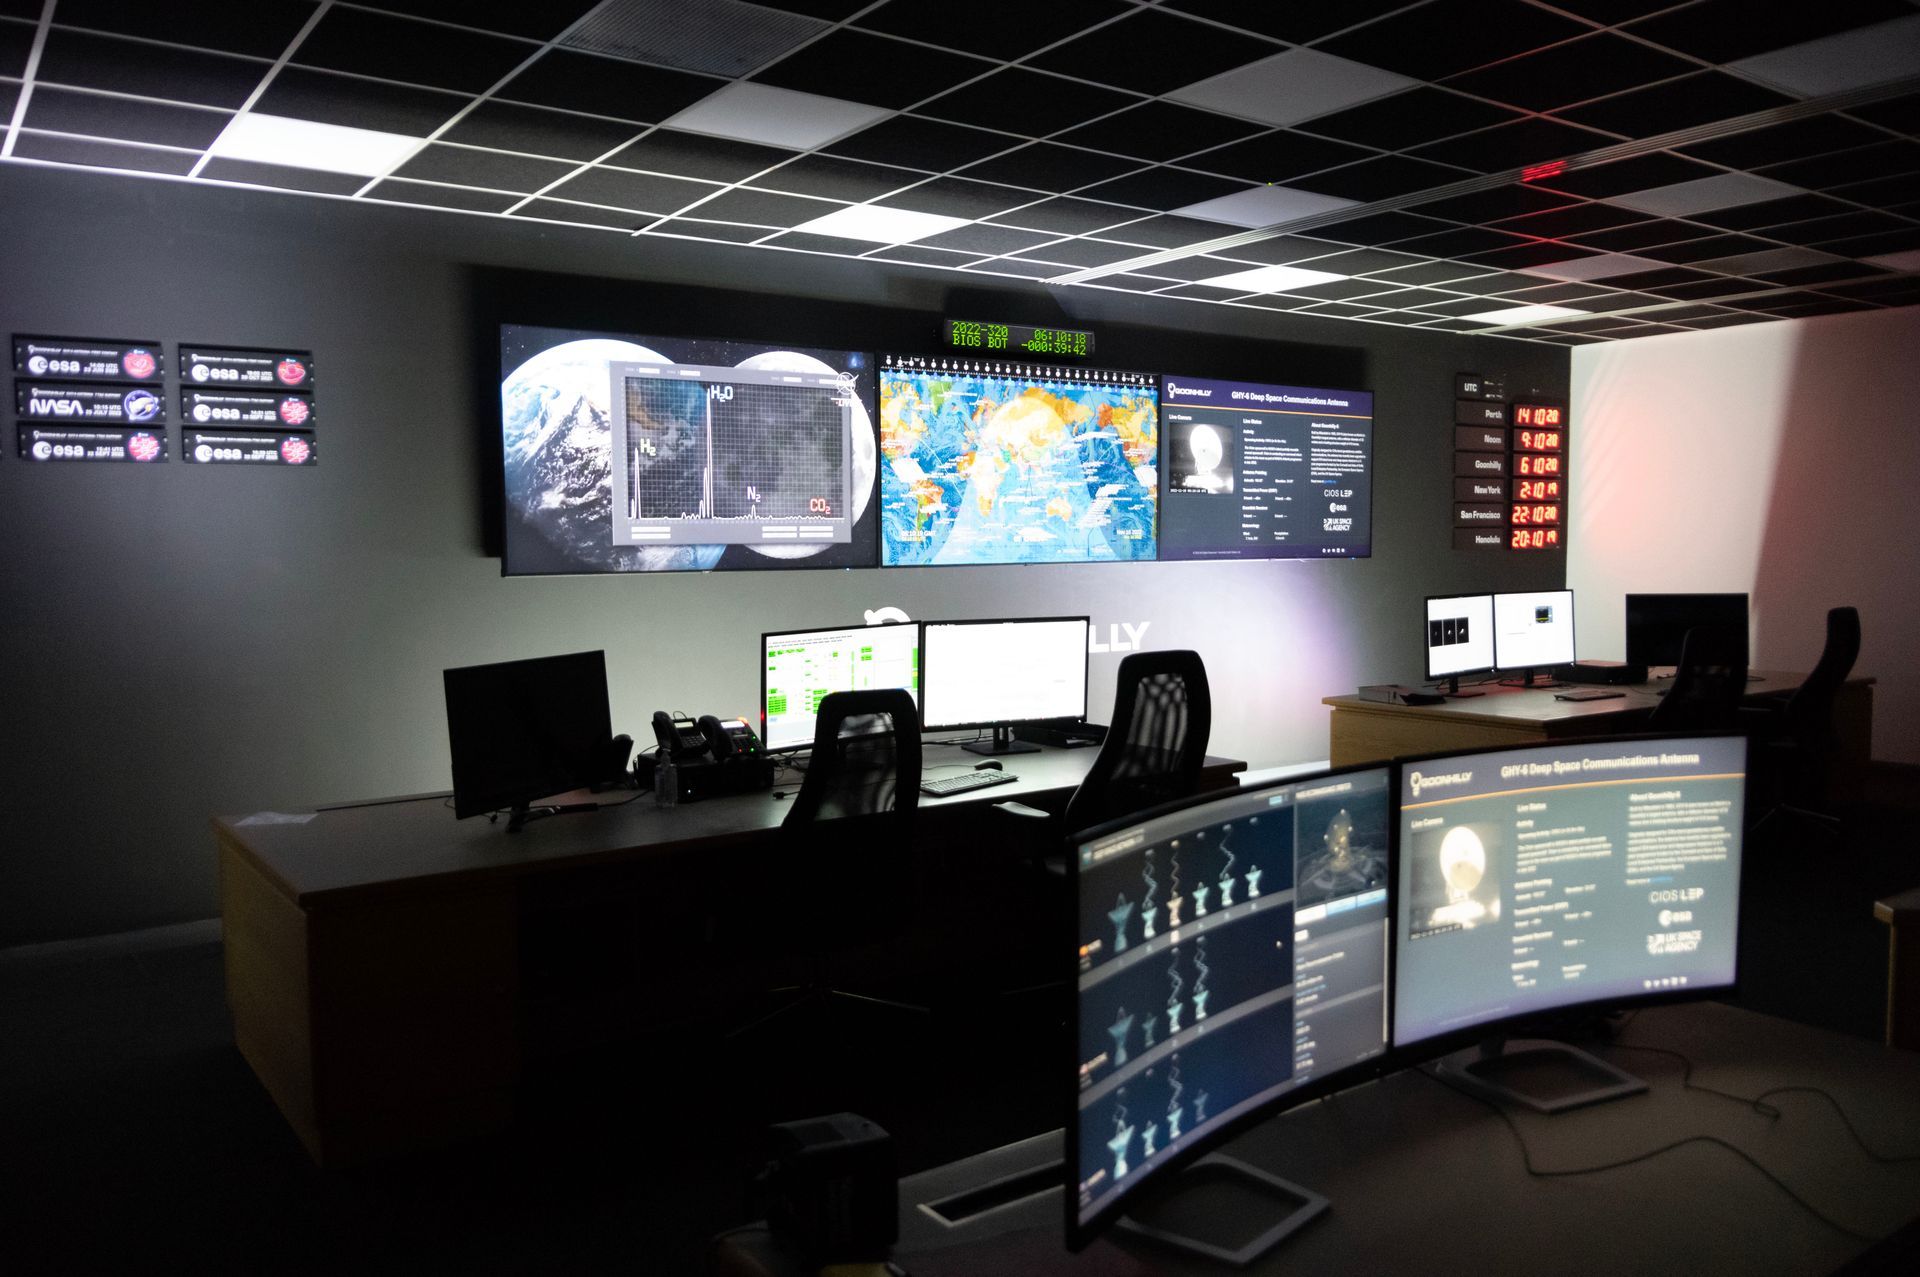 Young members of Goonhilly's Deep Space Network Operations team sit in the Operational Control Centre (OCA), tracking a spacecraft for an international space agency